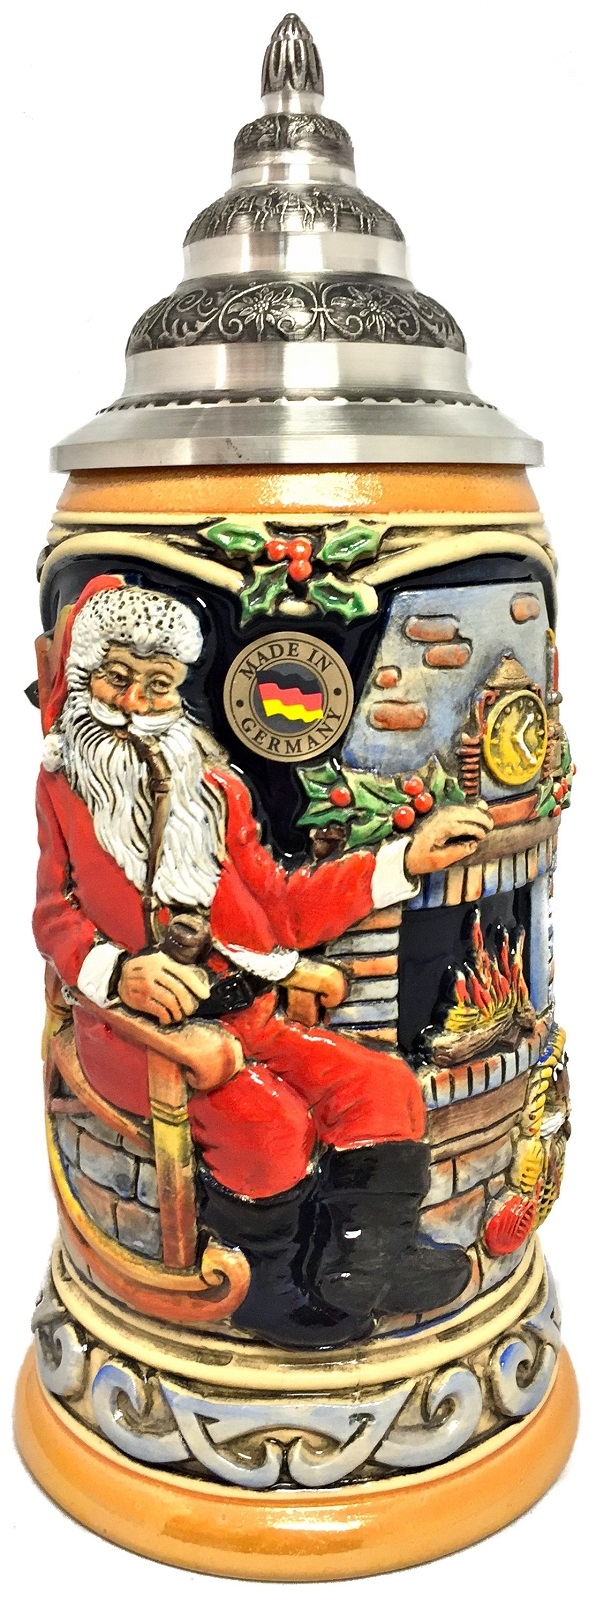 Santa Claus at Home Sitting by Fireplace LE German Christmas Beer Stein .75 L